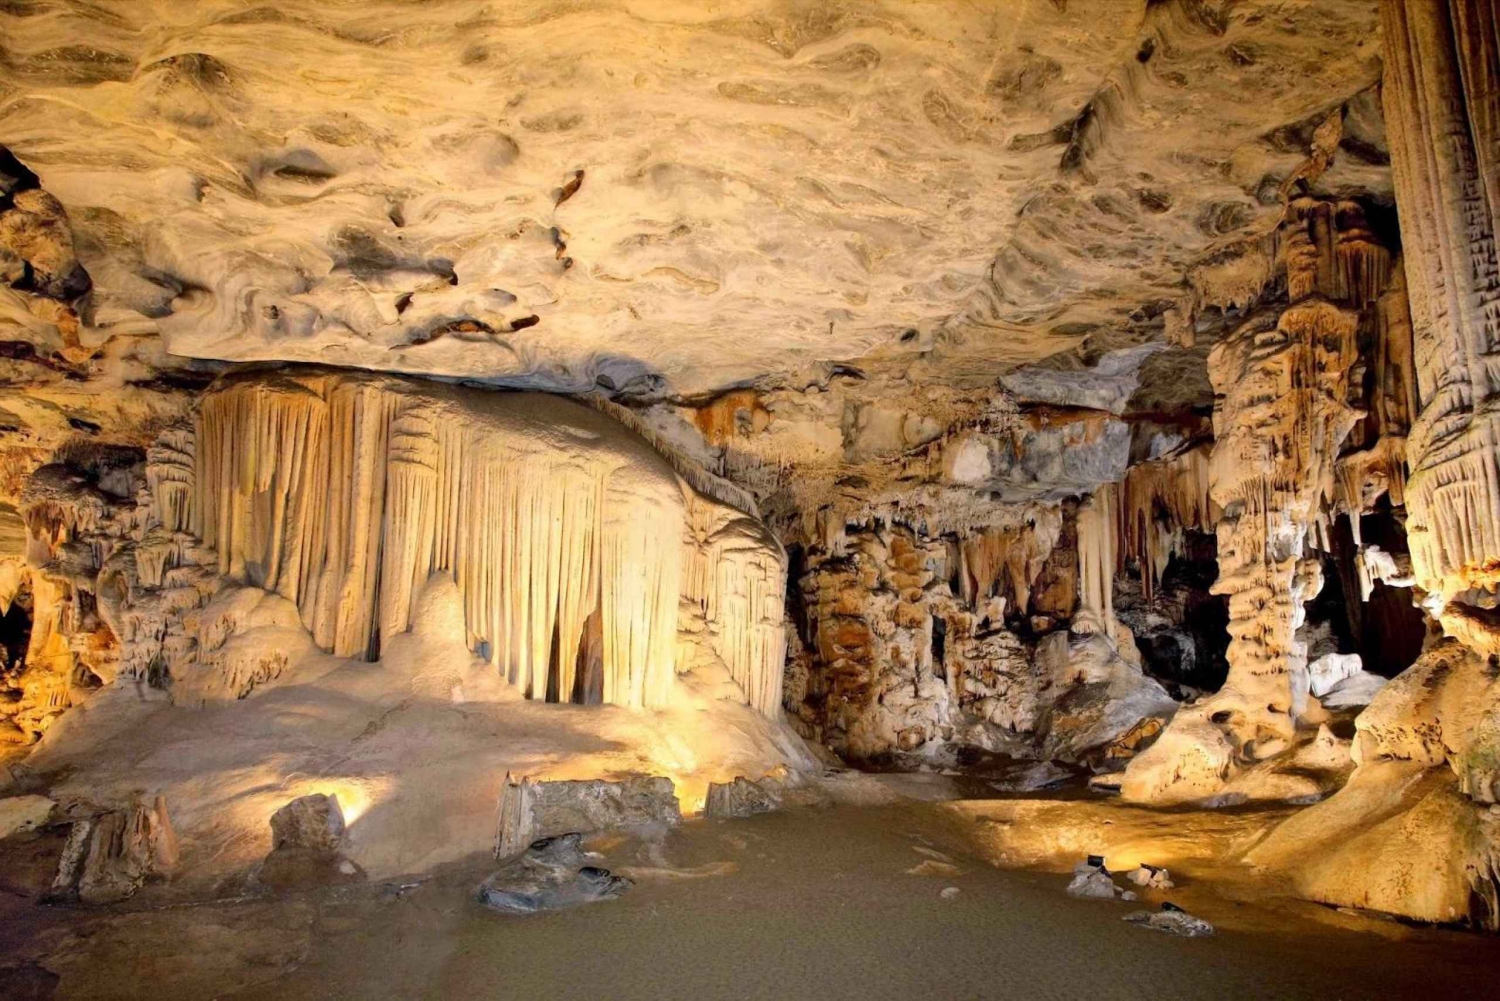 Cradle of Humankind and Sterkfontein Caves Half-Day Tour